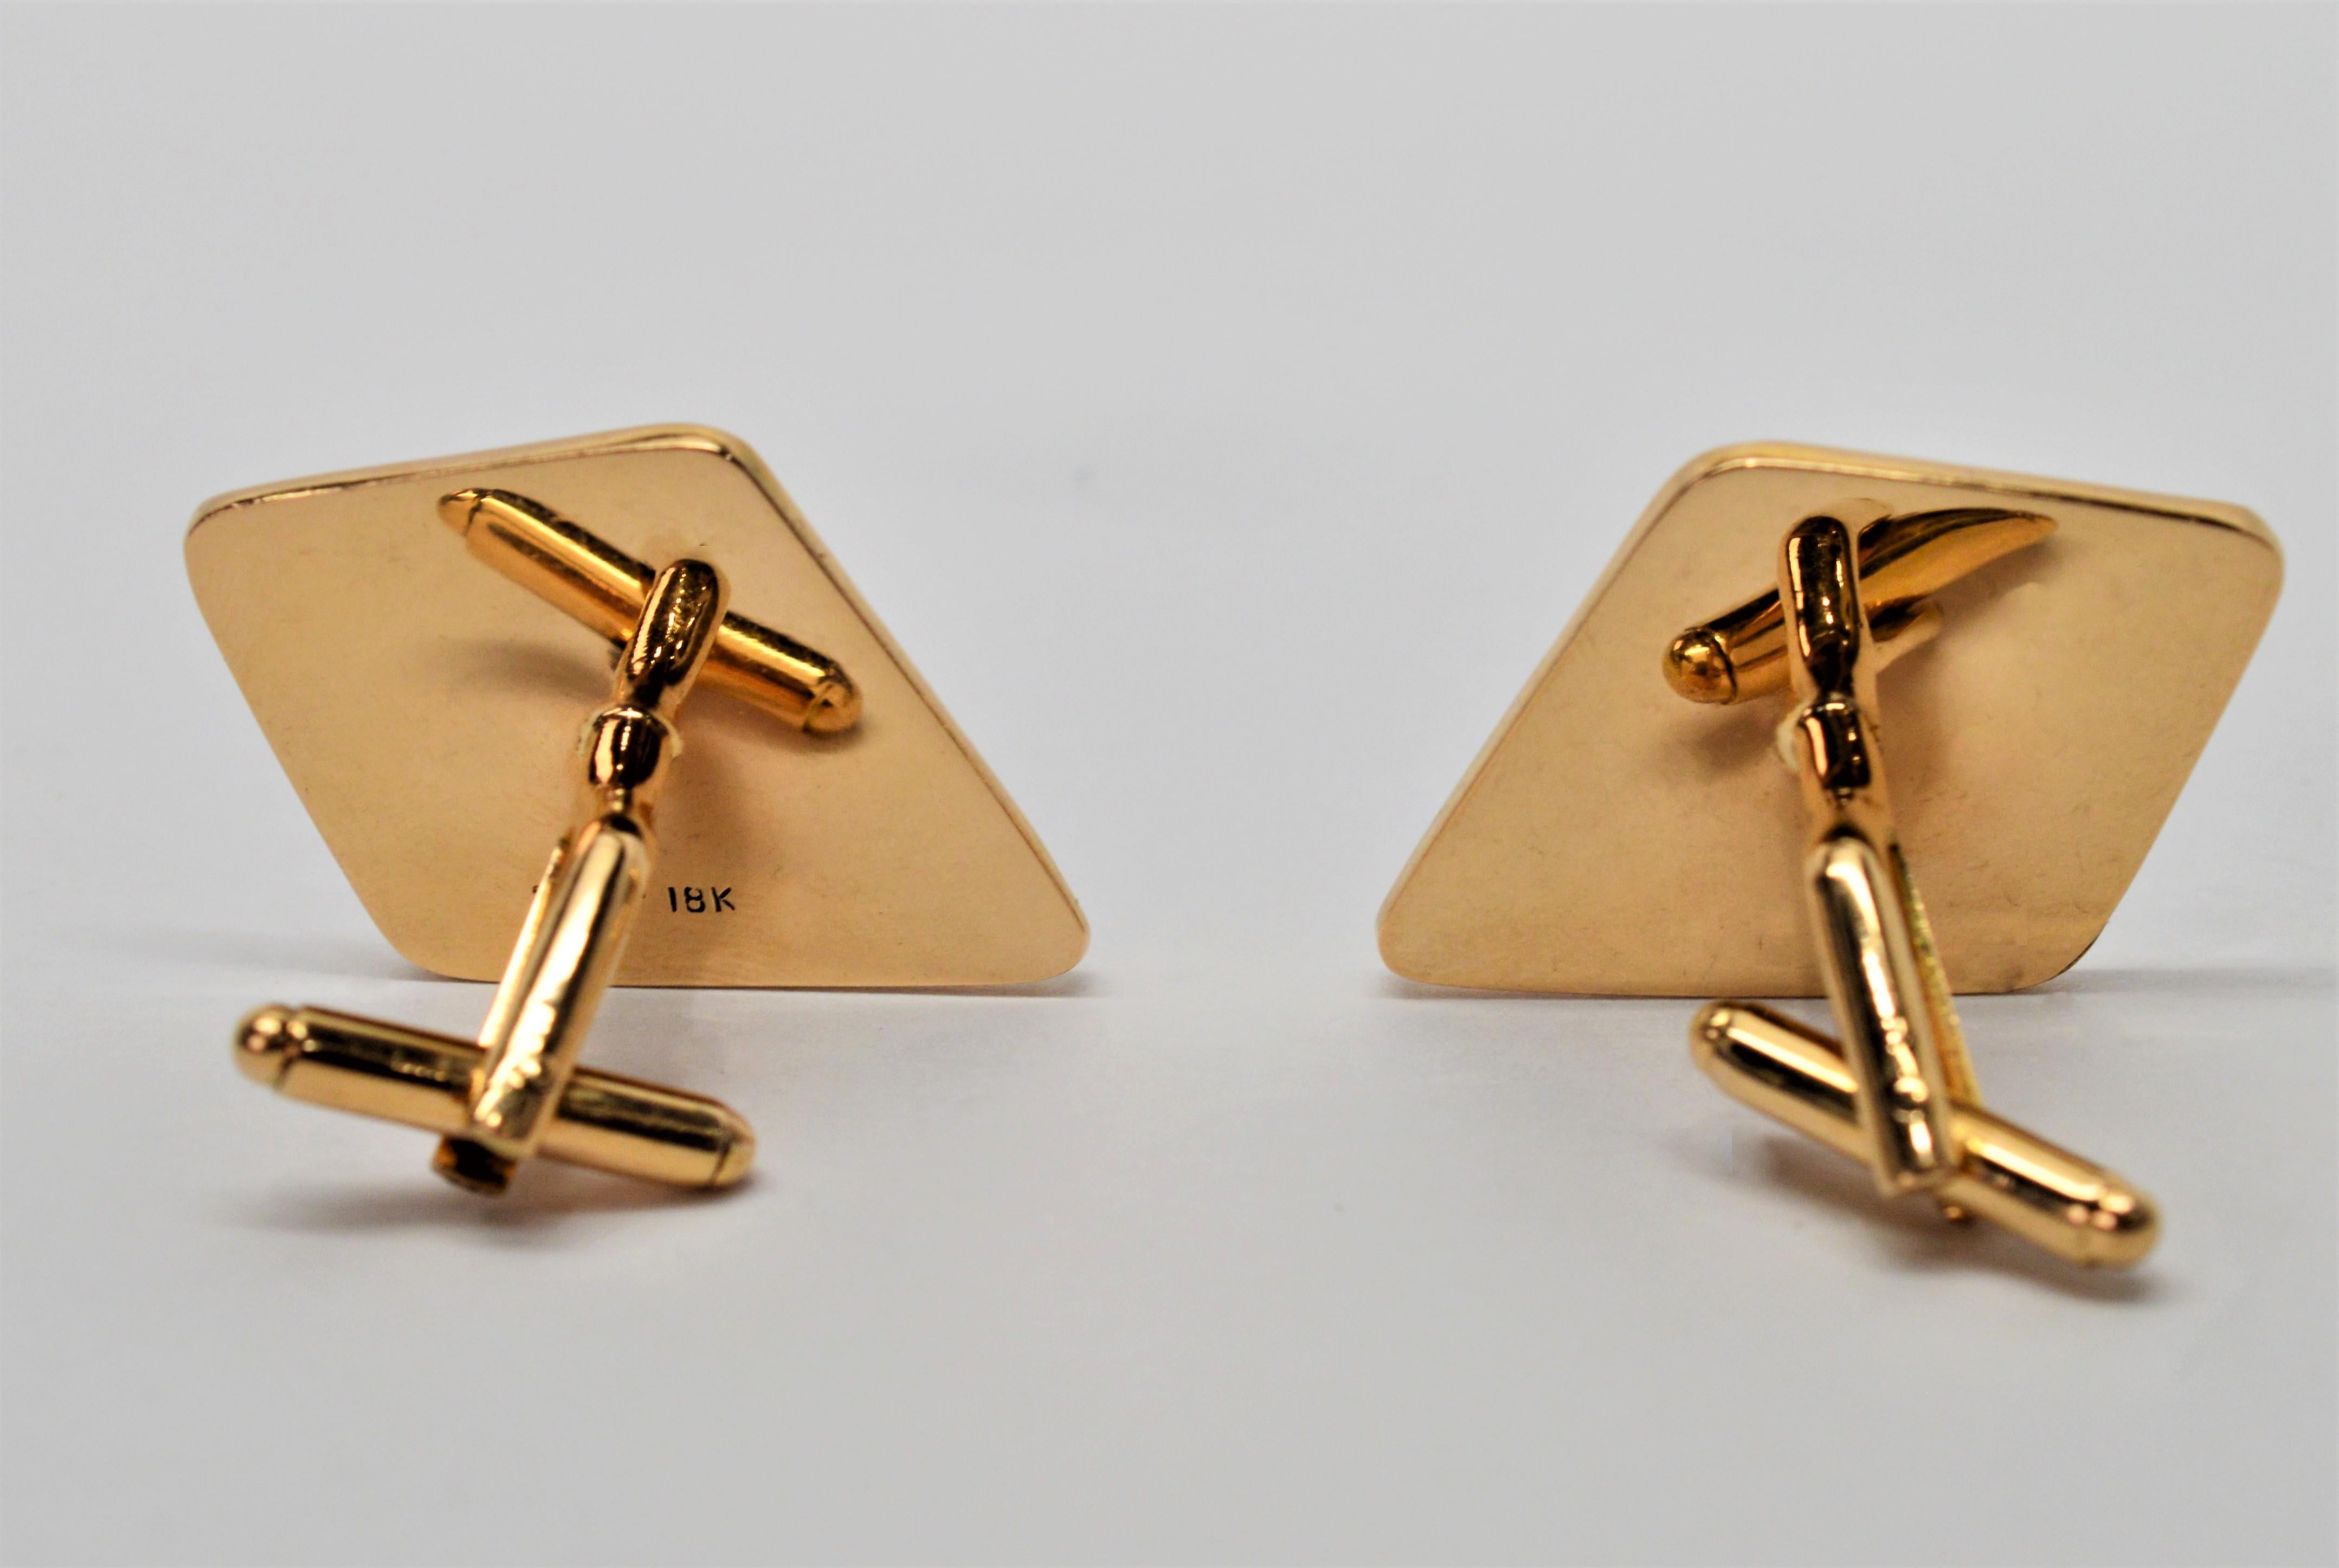 The captured wings of a butterfly adorn this craftsman pair of eighteen karat 18K yellow gold cuff links. Truly one-of-a-kind as dictated by nature, the colorful wing pattern with shades of blue and marigold, is encapsulated and displayed in these